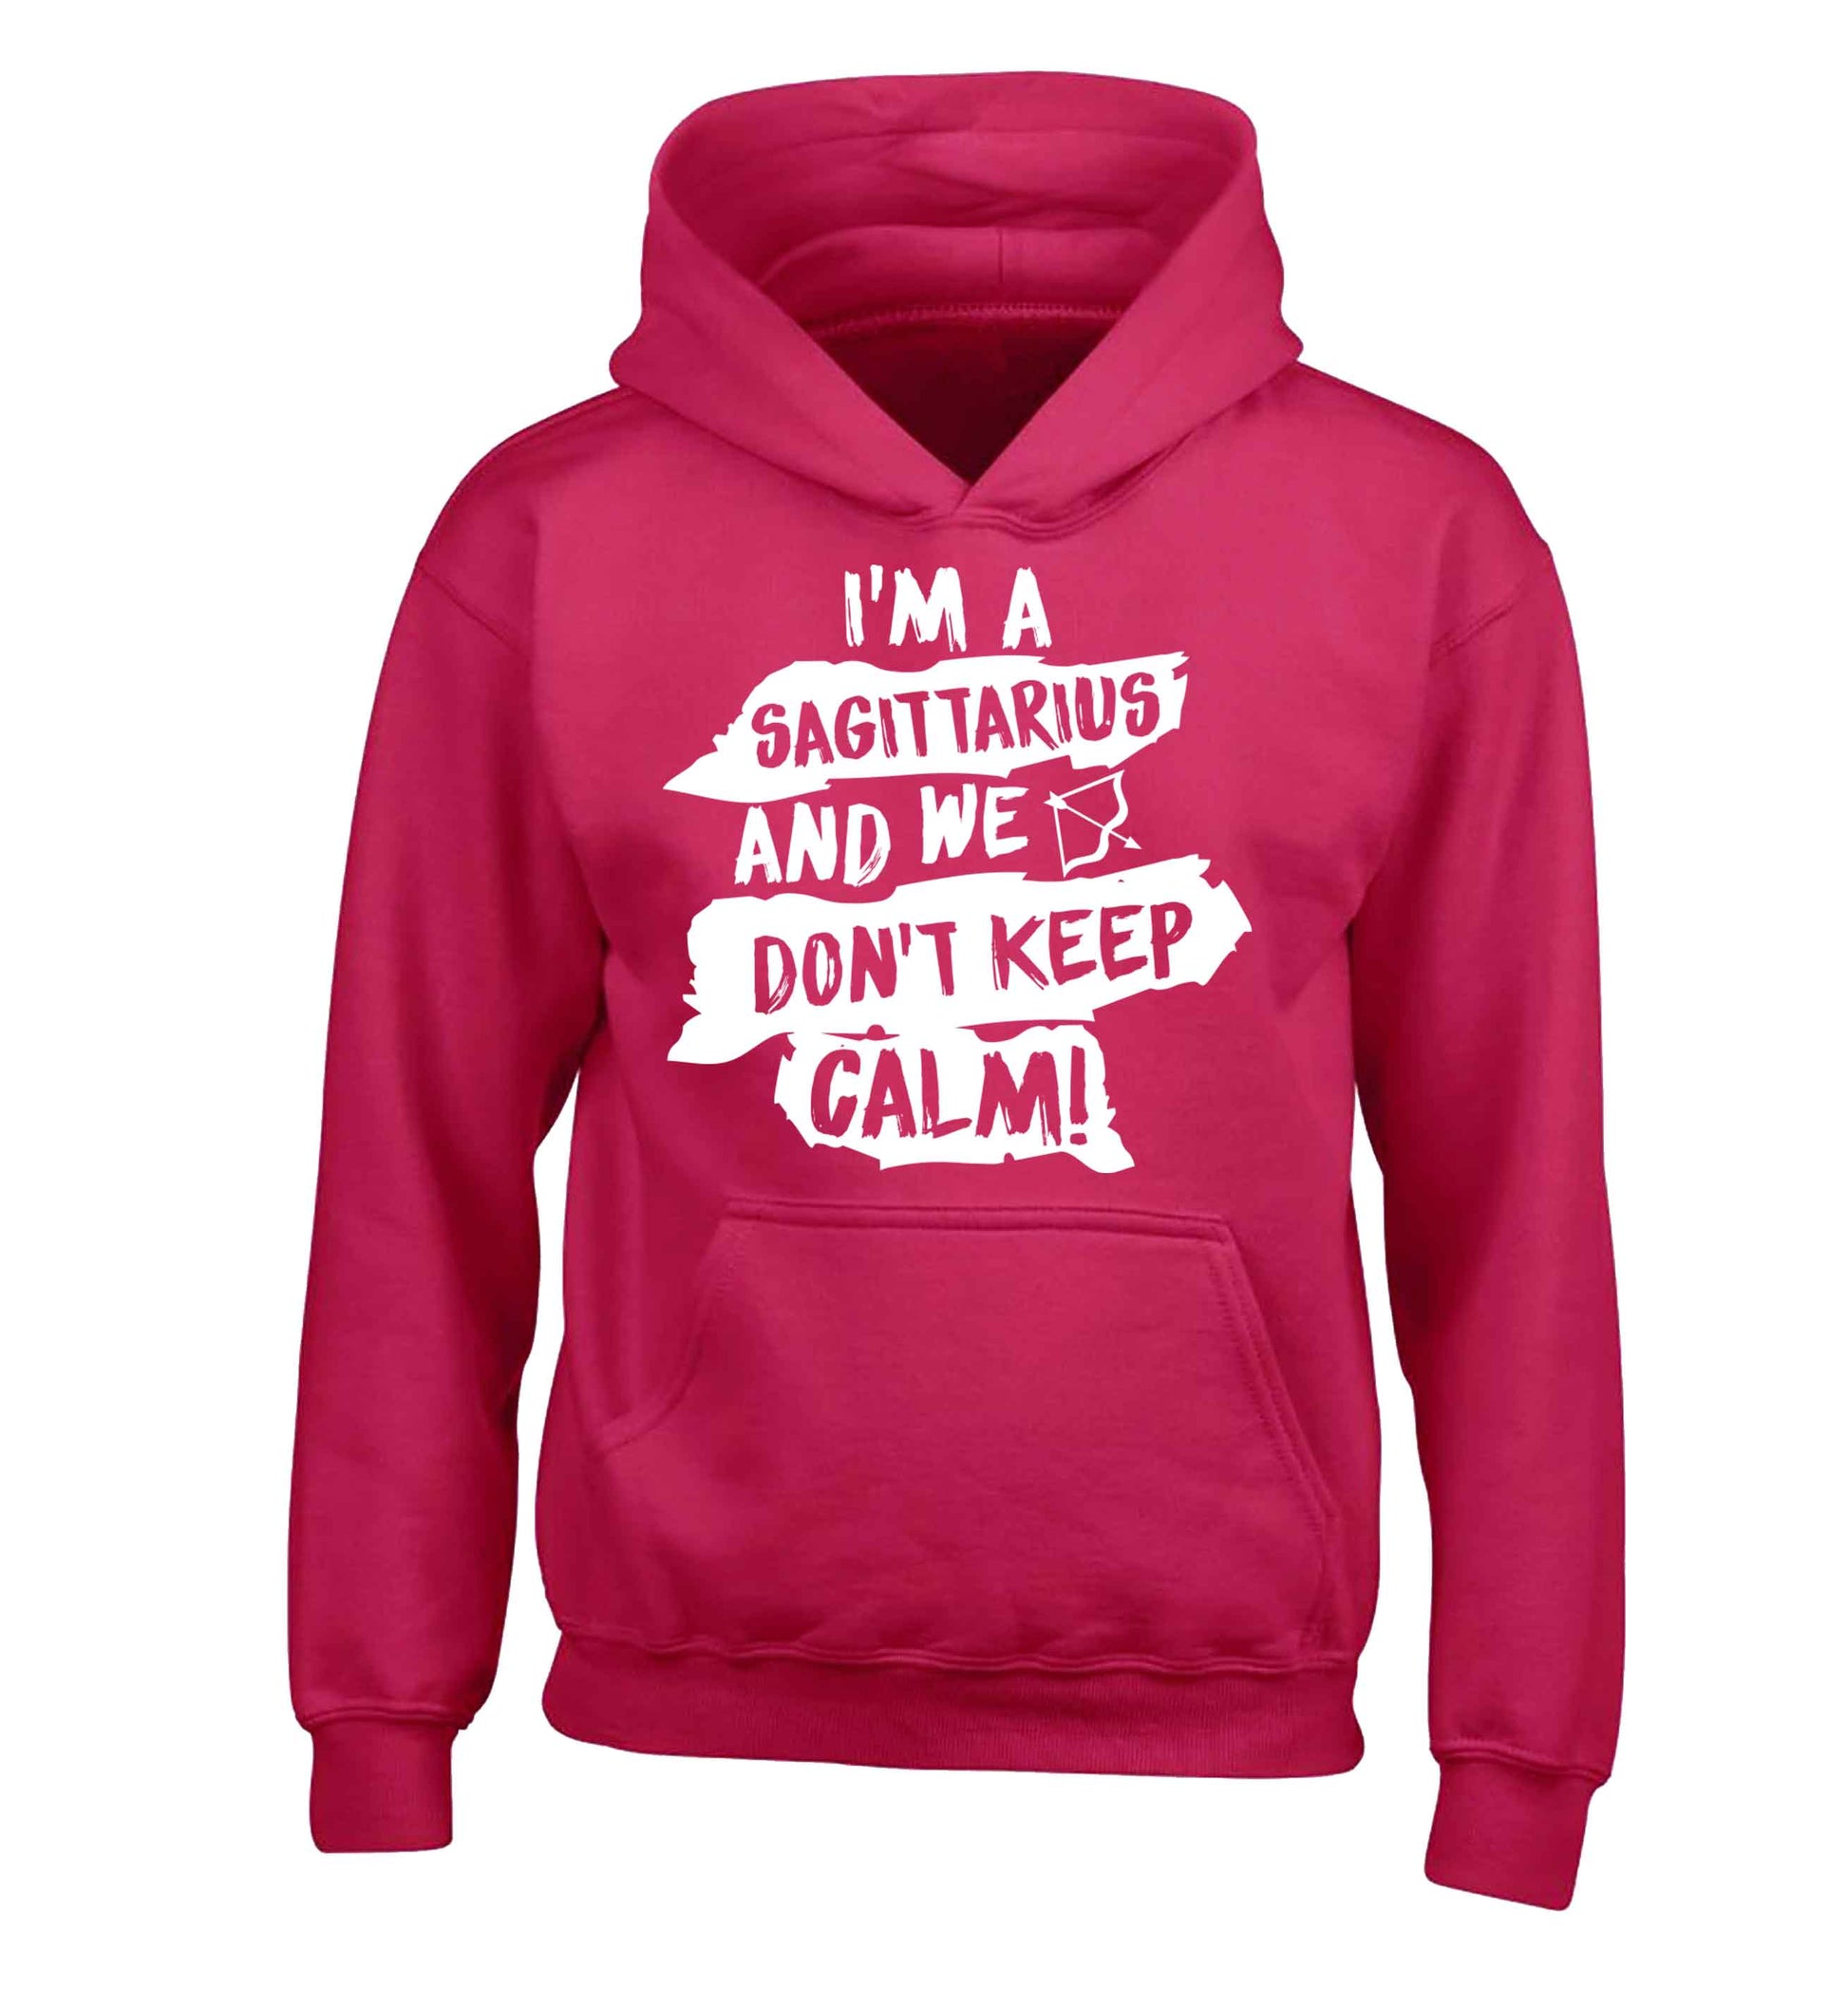 I'm a sagittarius and we don't keep calm children's pink hoodie 12-13 Years